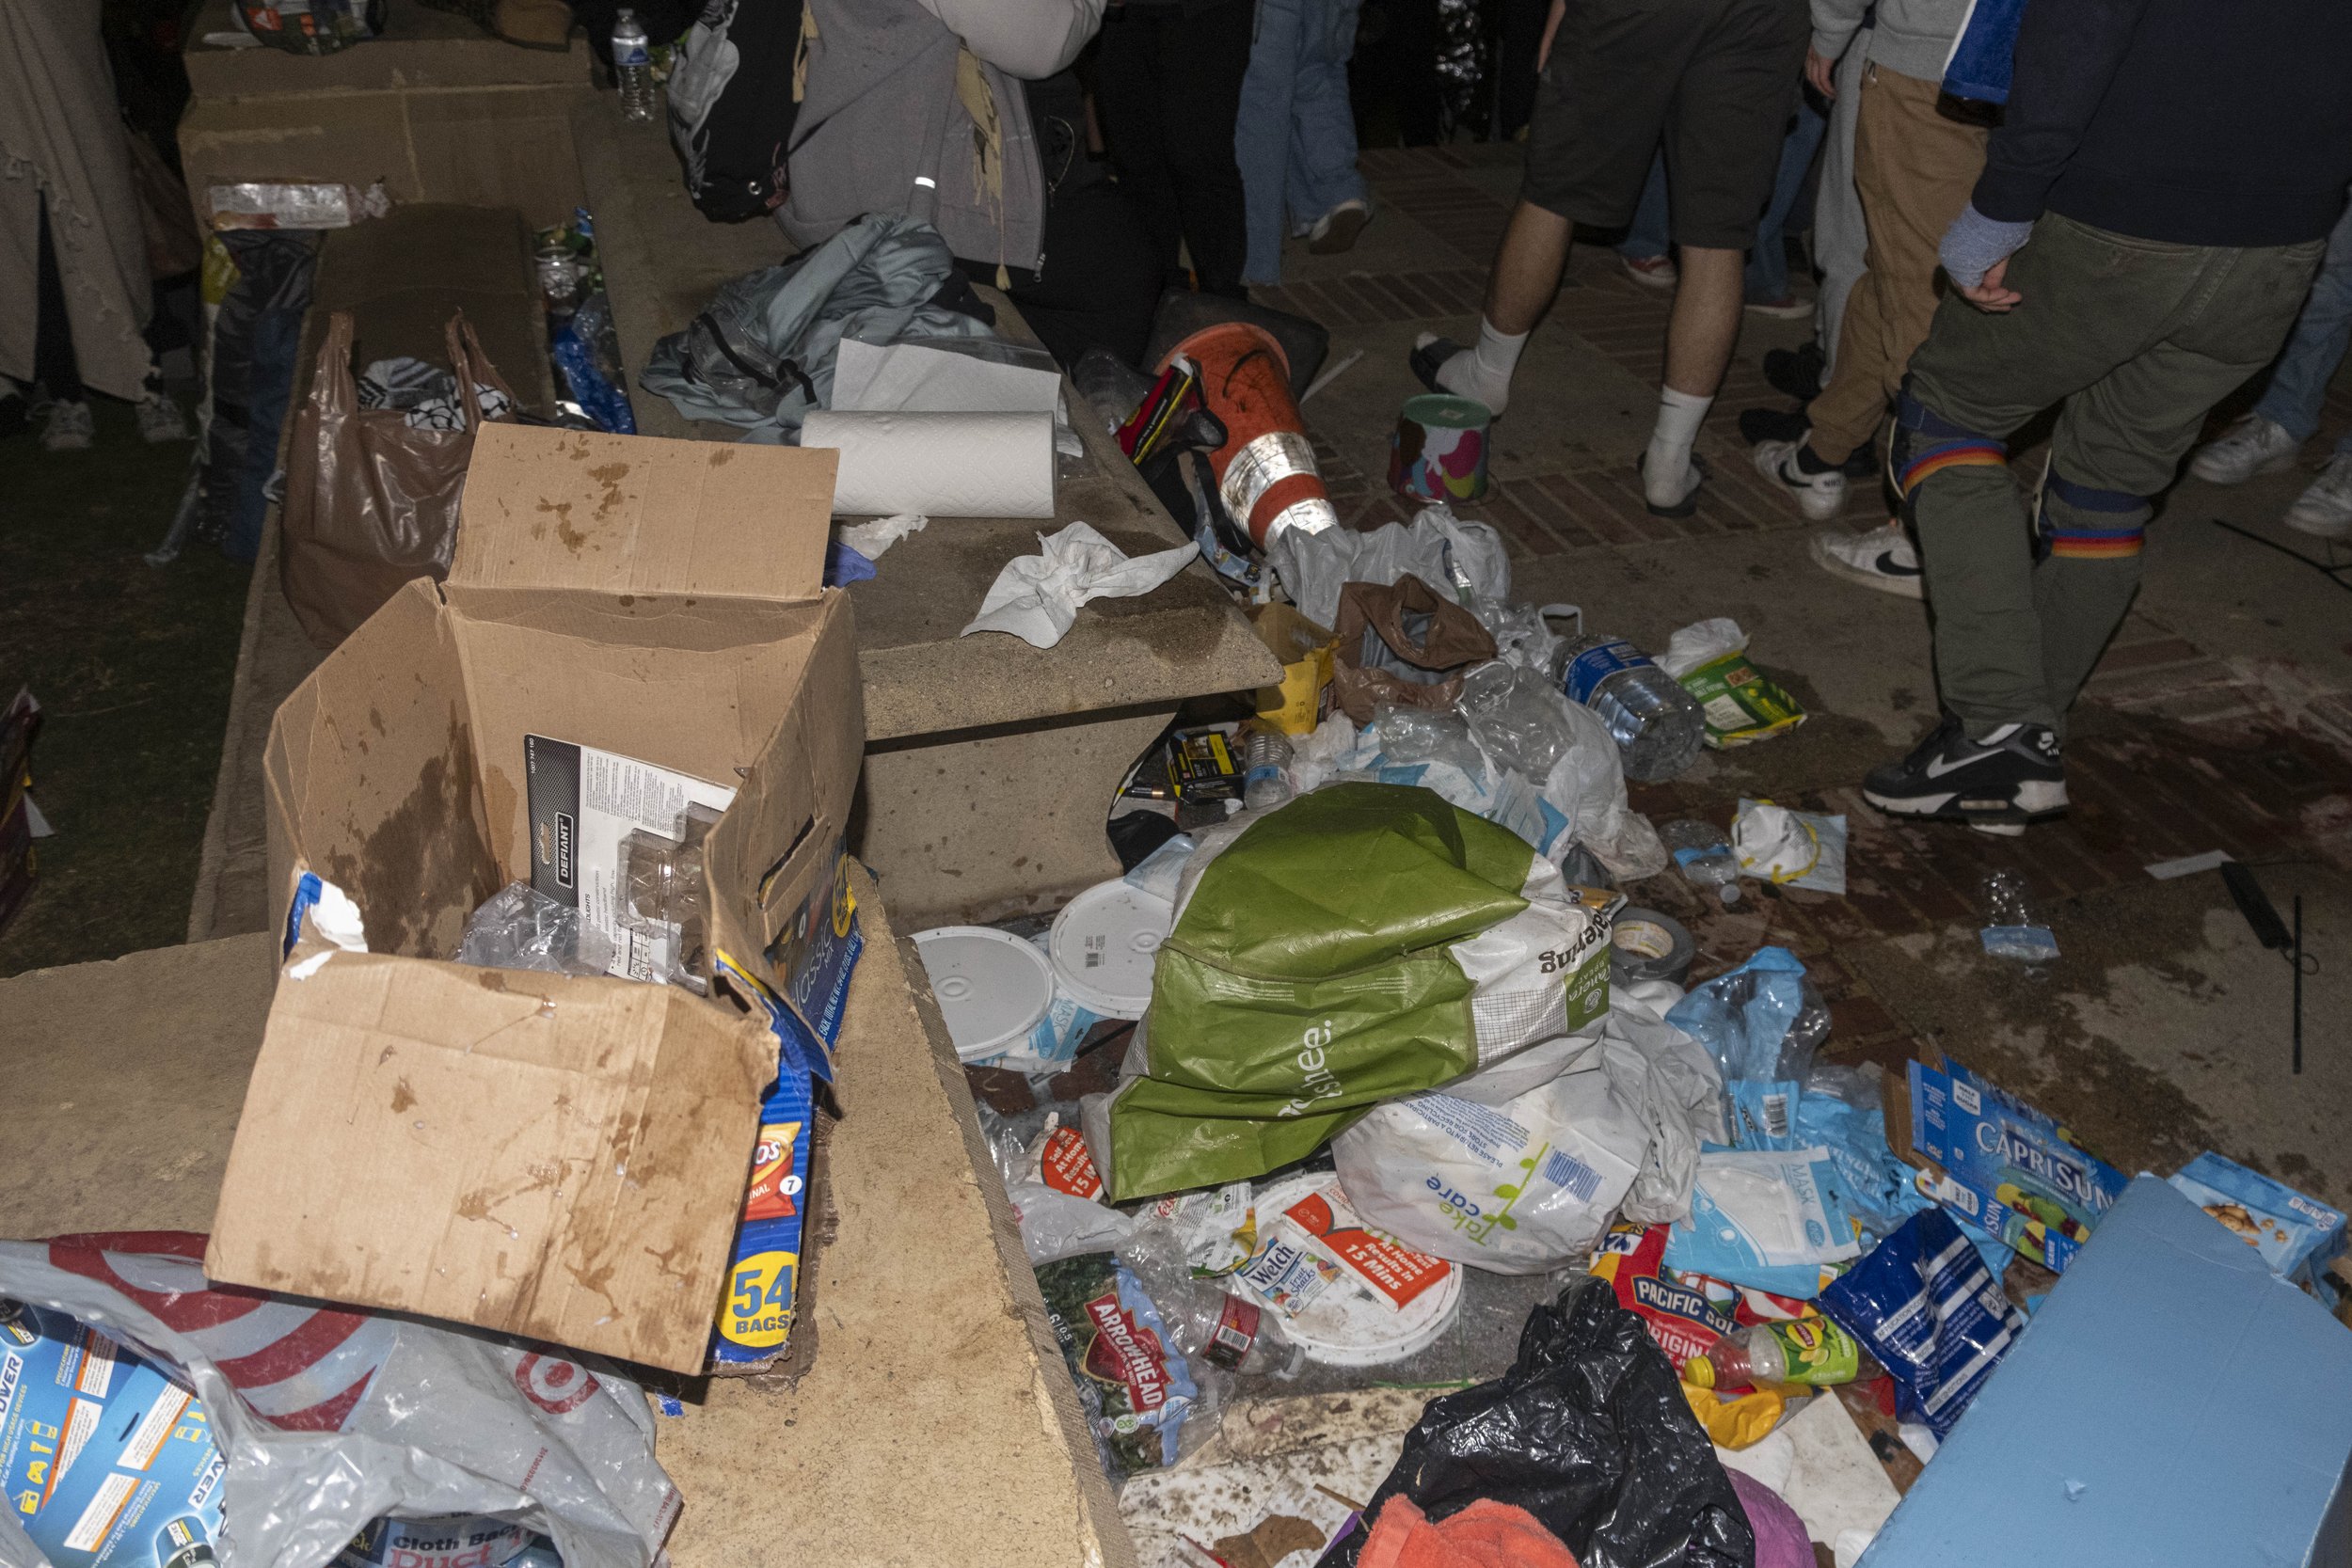  Trash left behind by pro-Palastinians after retreating down towards Wilson Plaza in the University of California, Los Angeles on Wednesday, May 1 at Los Angeles, Calif. (Danilo Perez | The Corsair) 